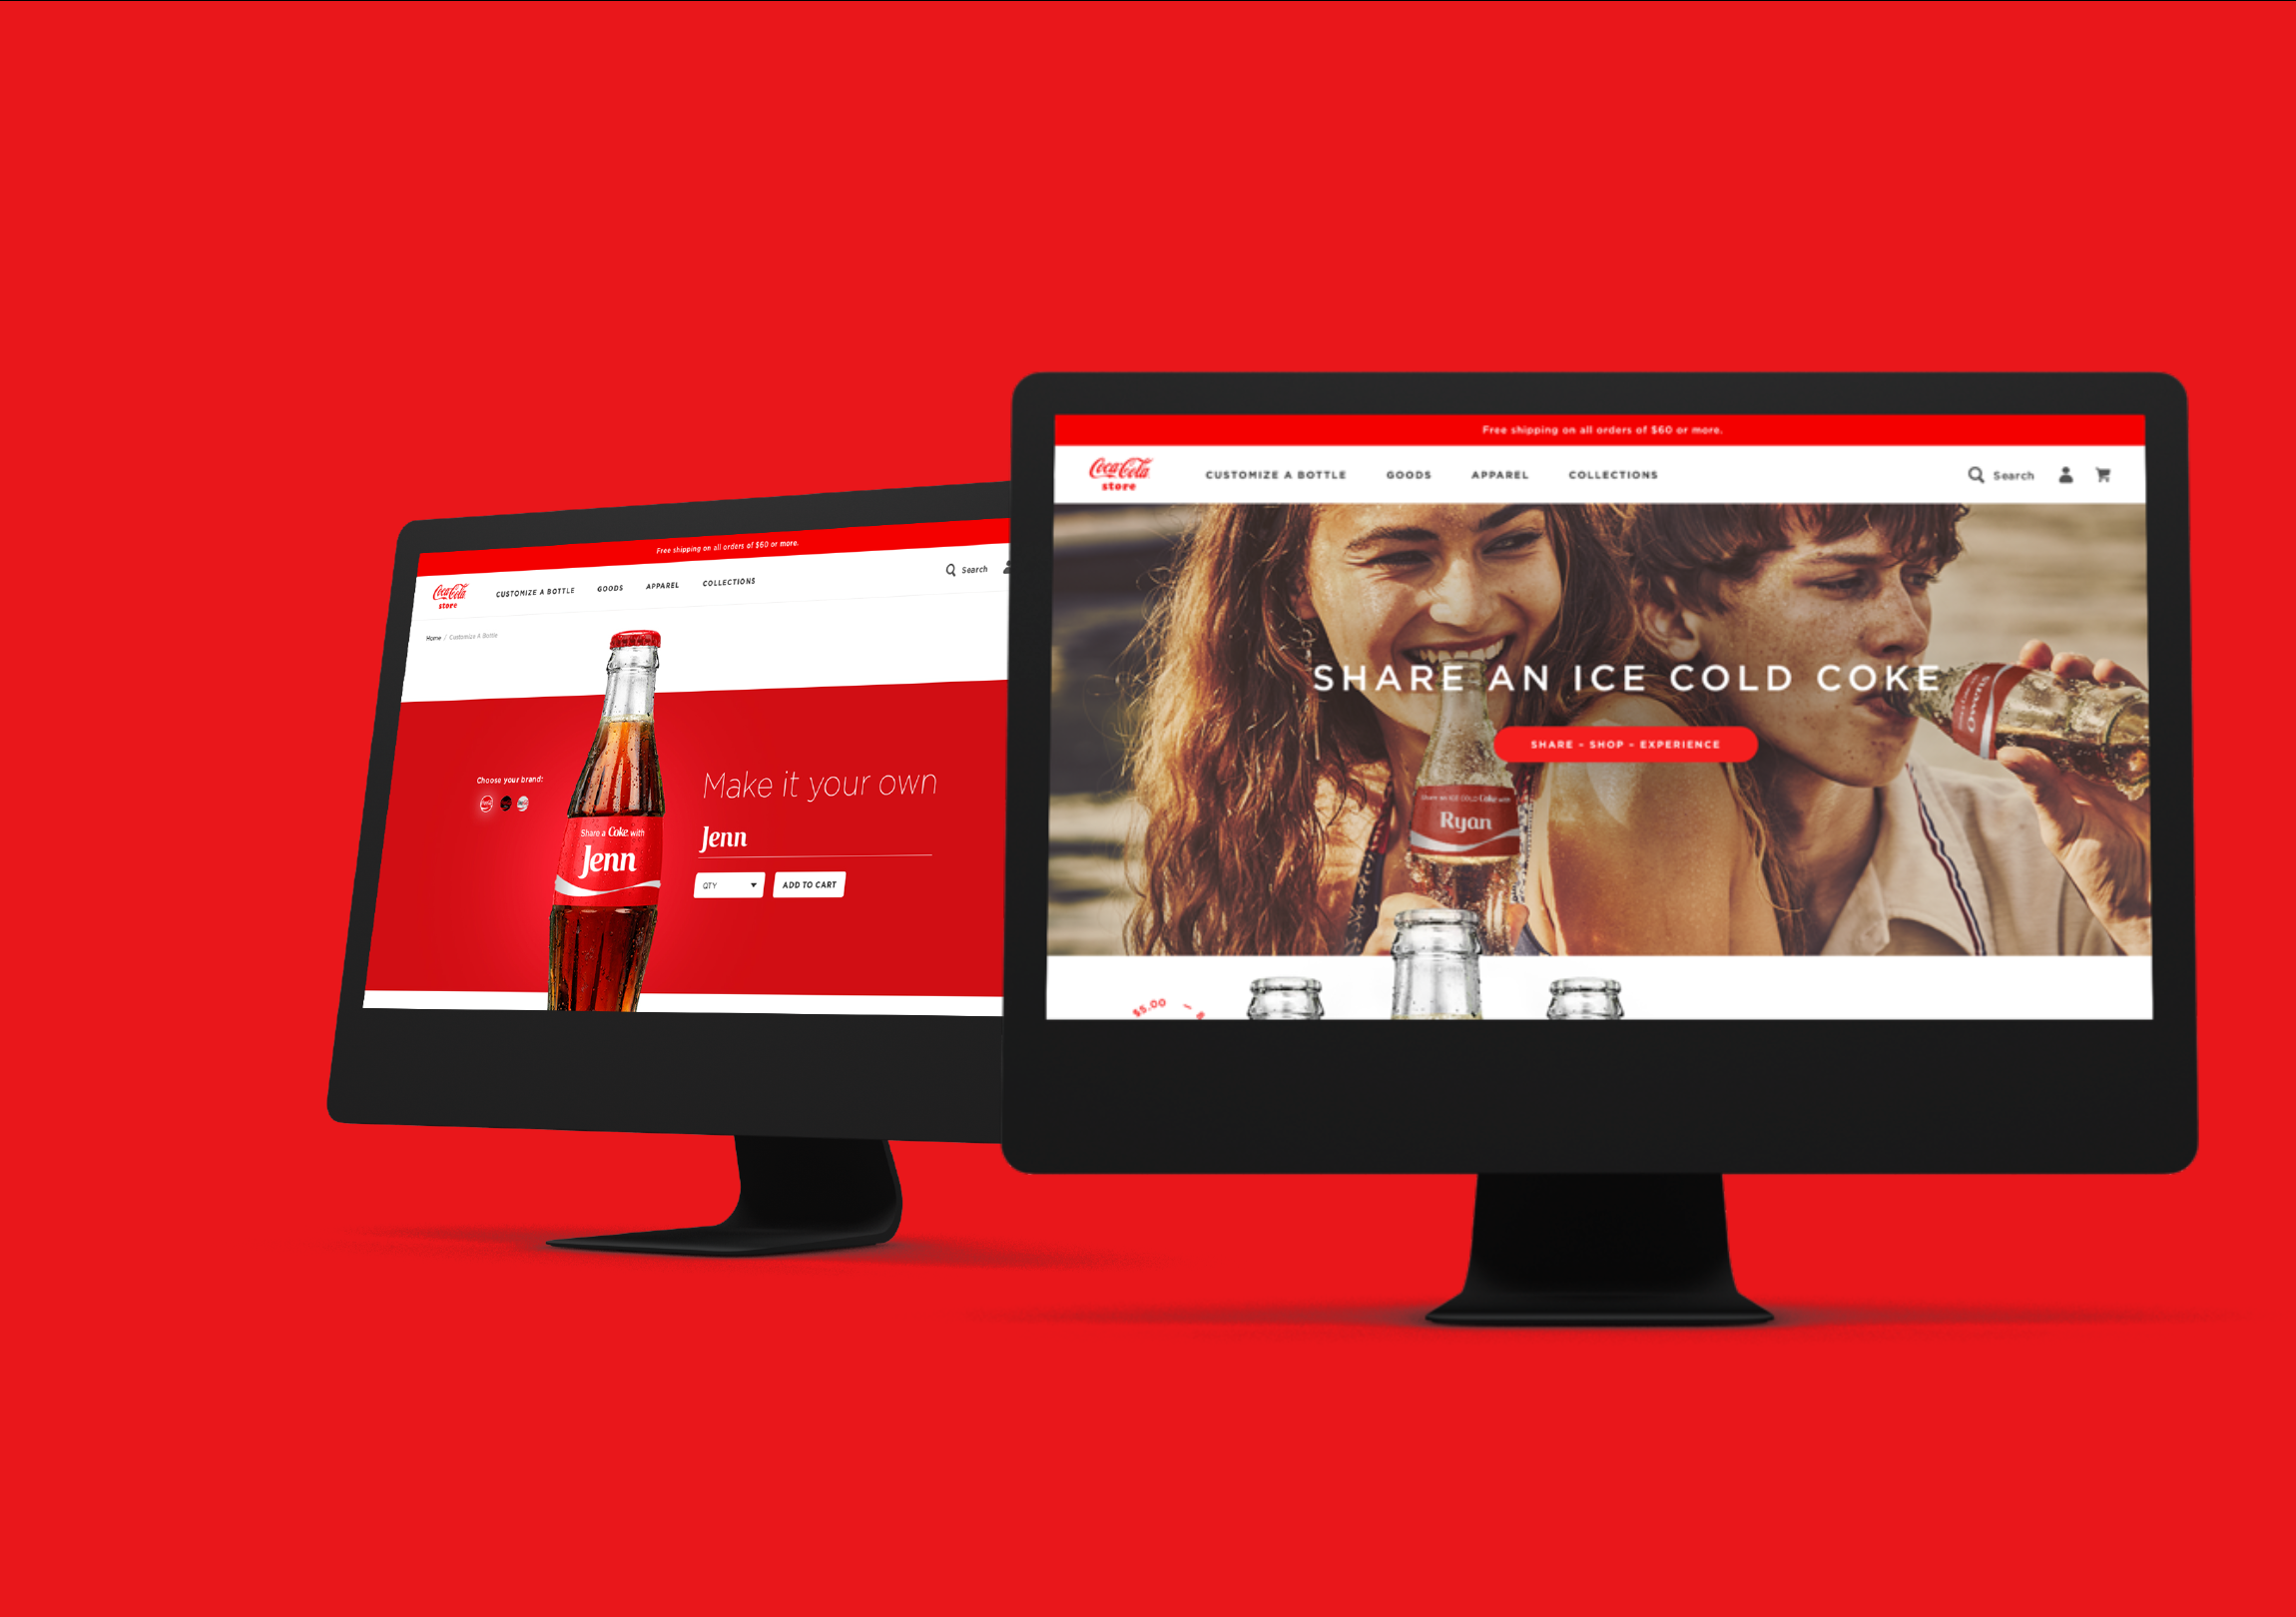 two coke website pages displayed on monitors side-by-side